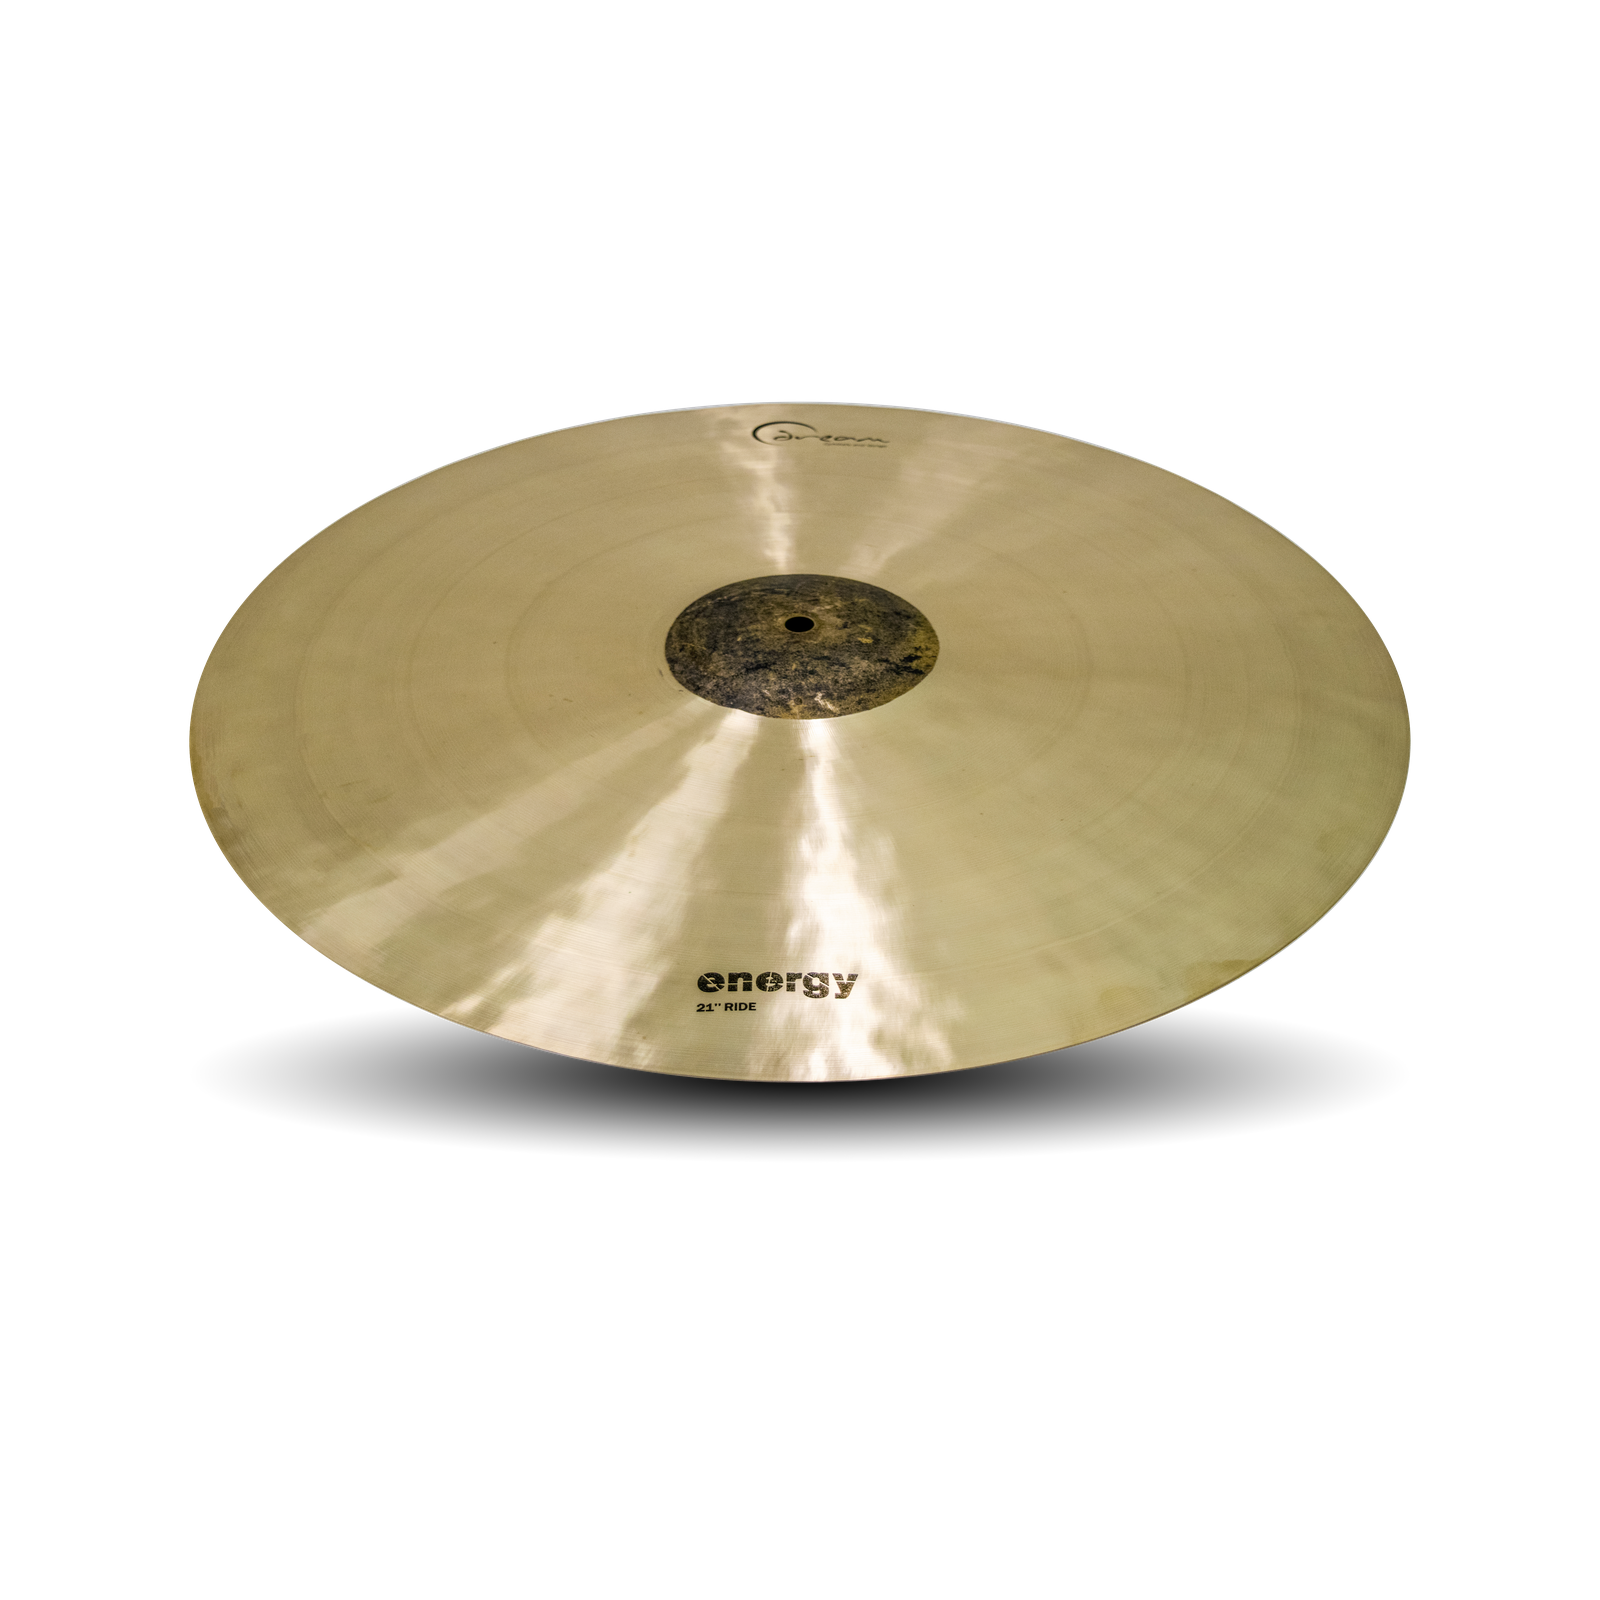 Dream Cymbals Energy Series 20" Ride